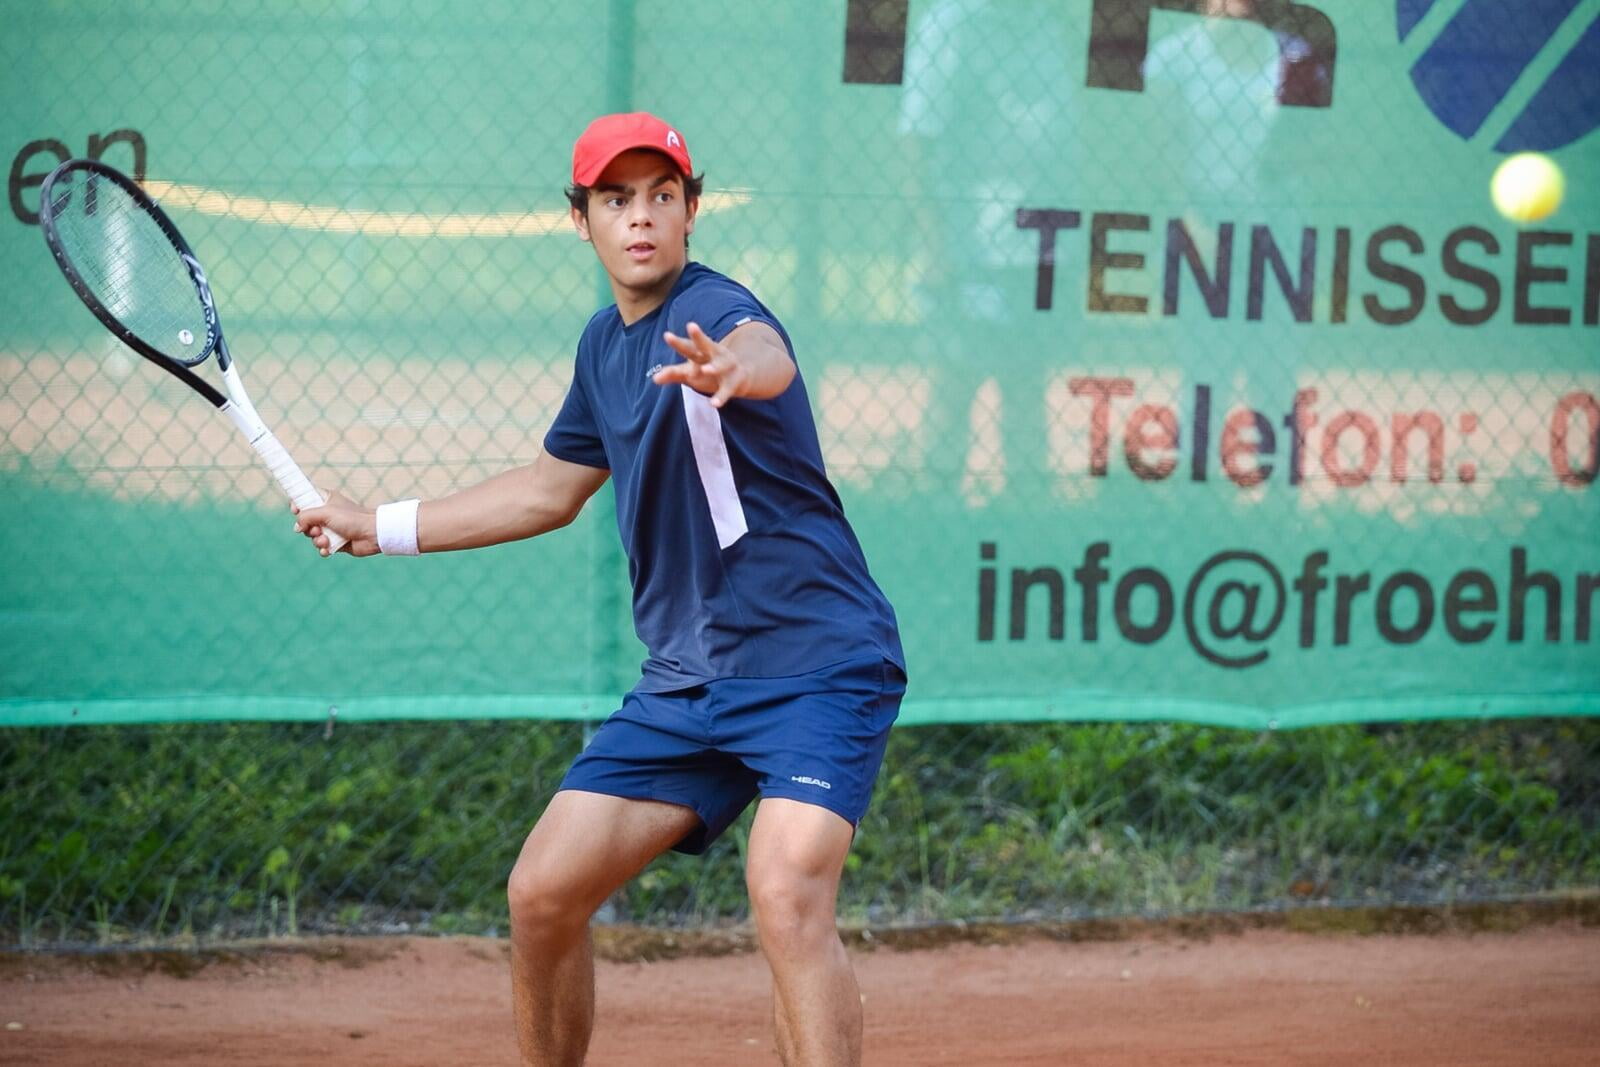 male tennis player in a blue outfit preparing to hit a forehand